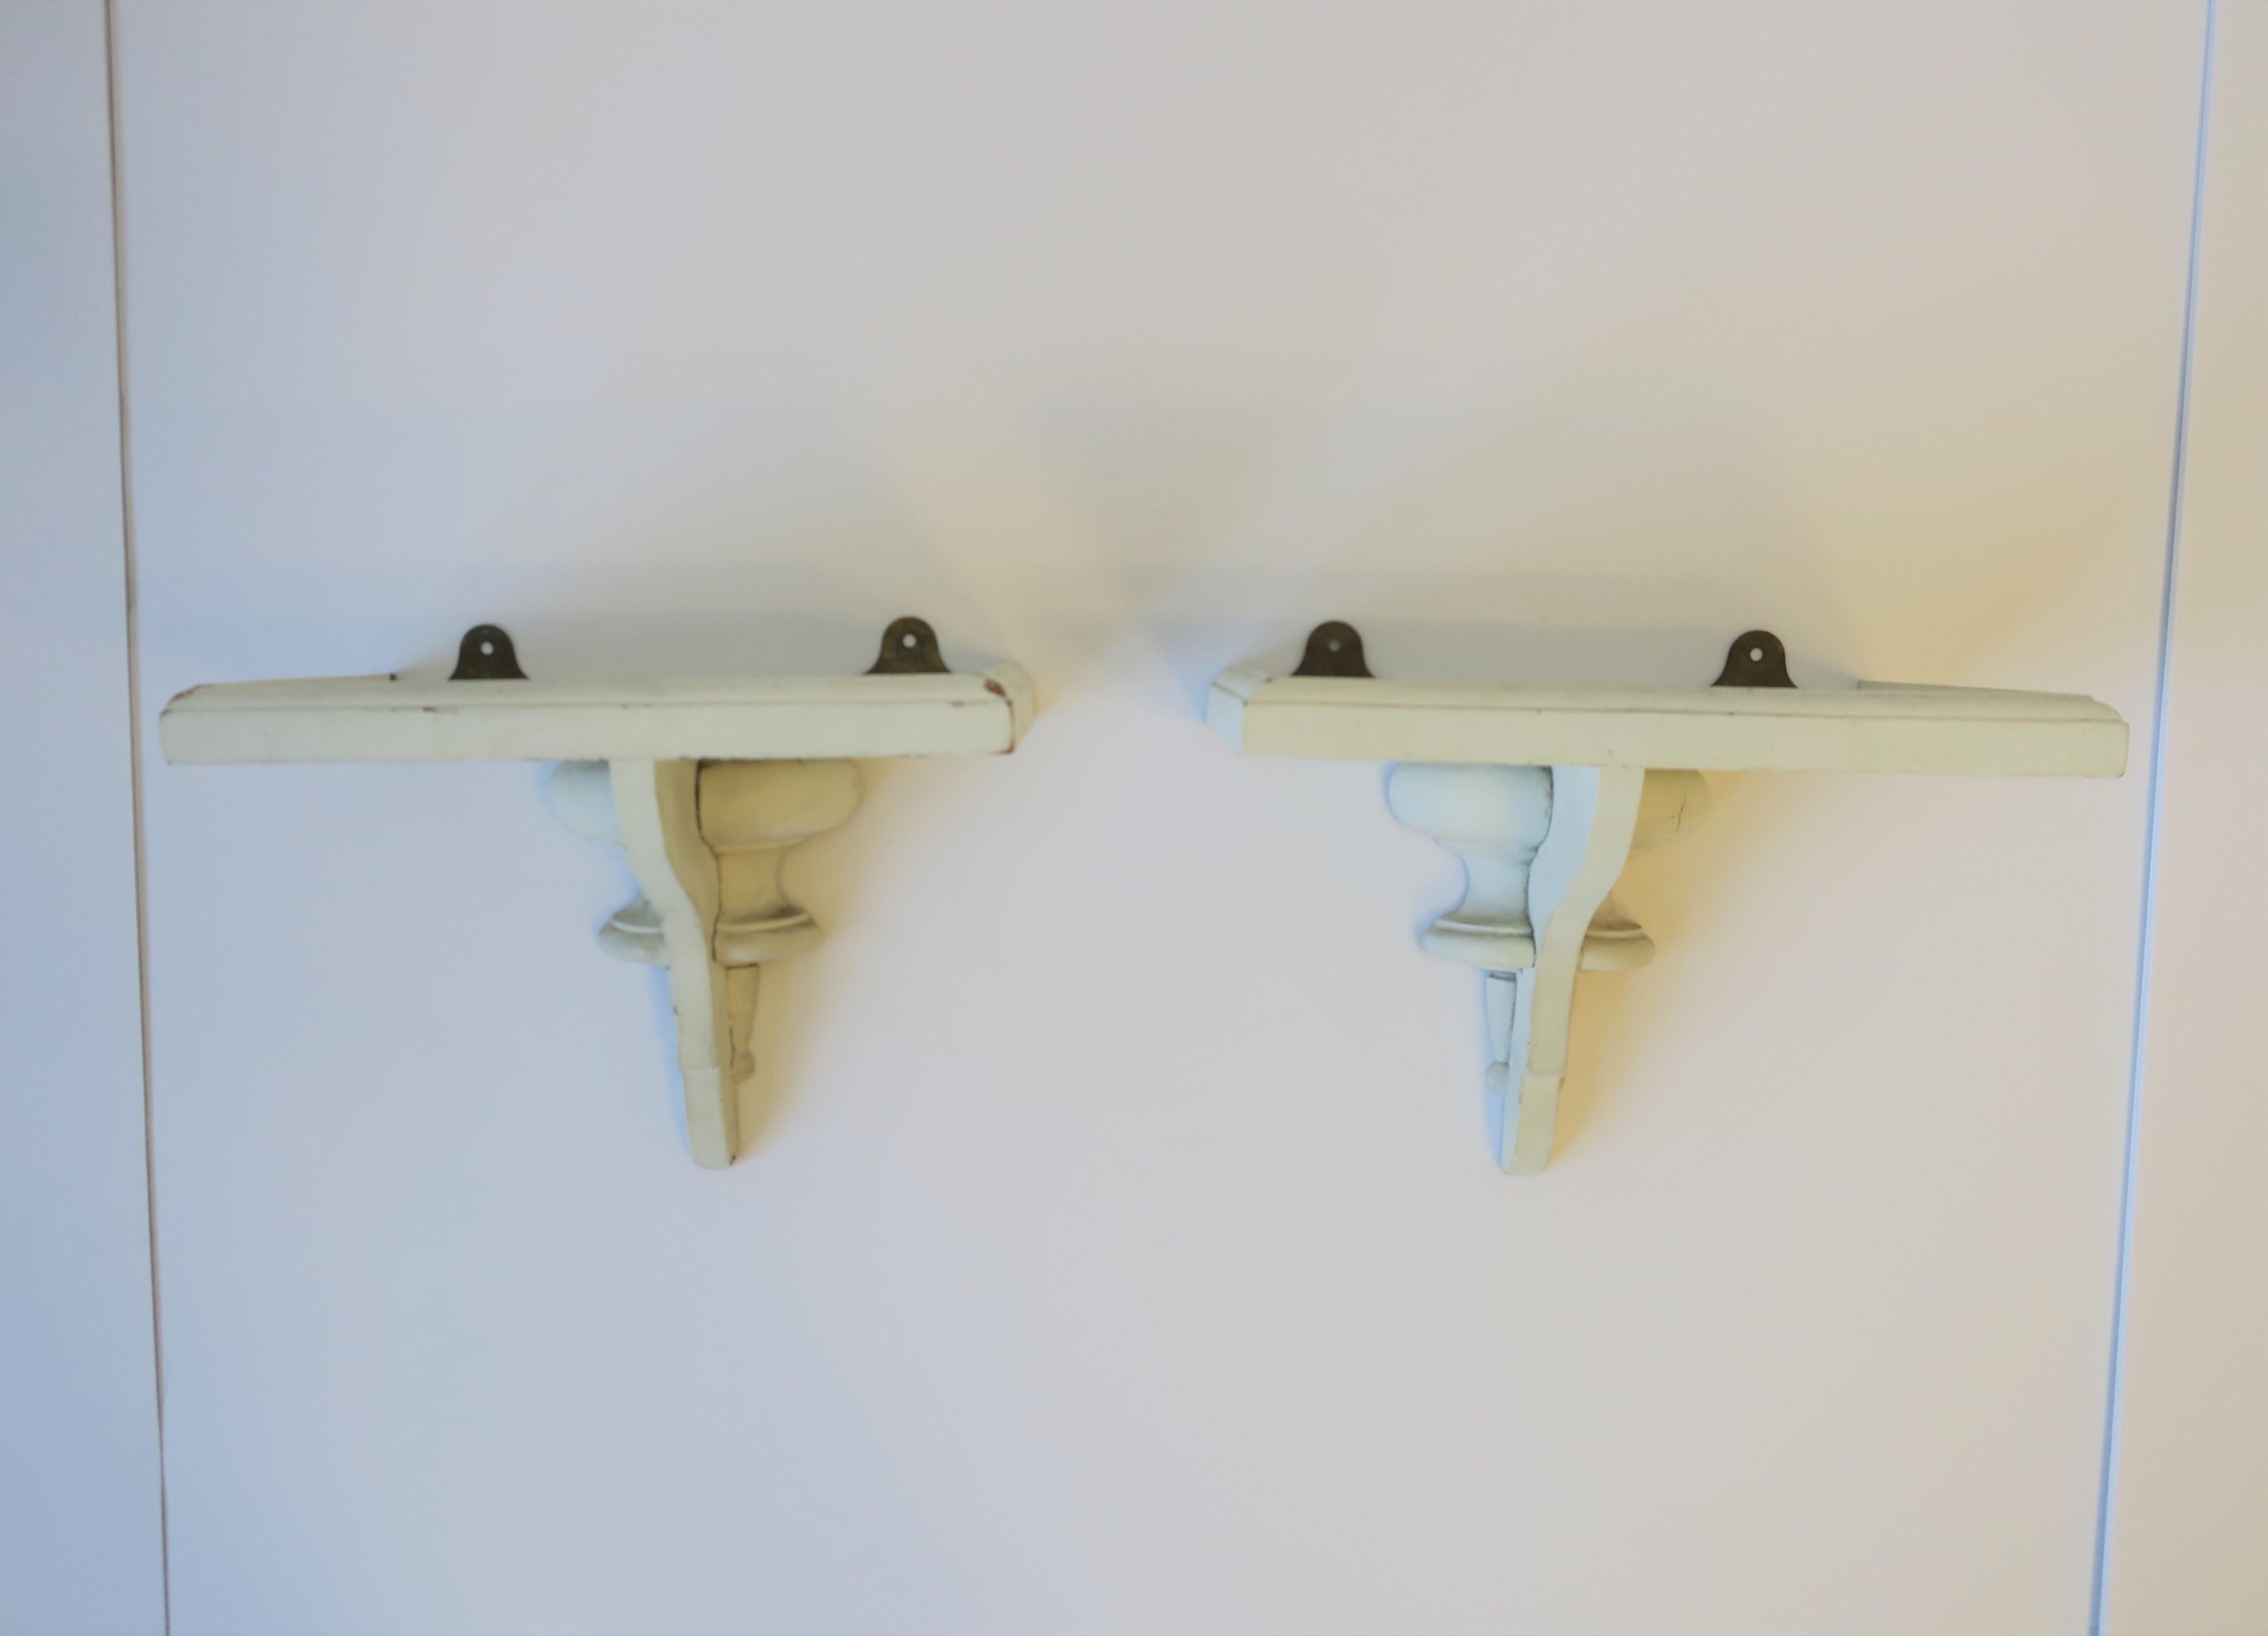 A pair of white painted turned wood wall shelves with gallery edge, circa early-20th century. Set can be used to display vases, sculpture, decorative objects, seashells (demonstrated), etc. Prepared for handing as shown. Dimensions: 7.13